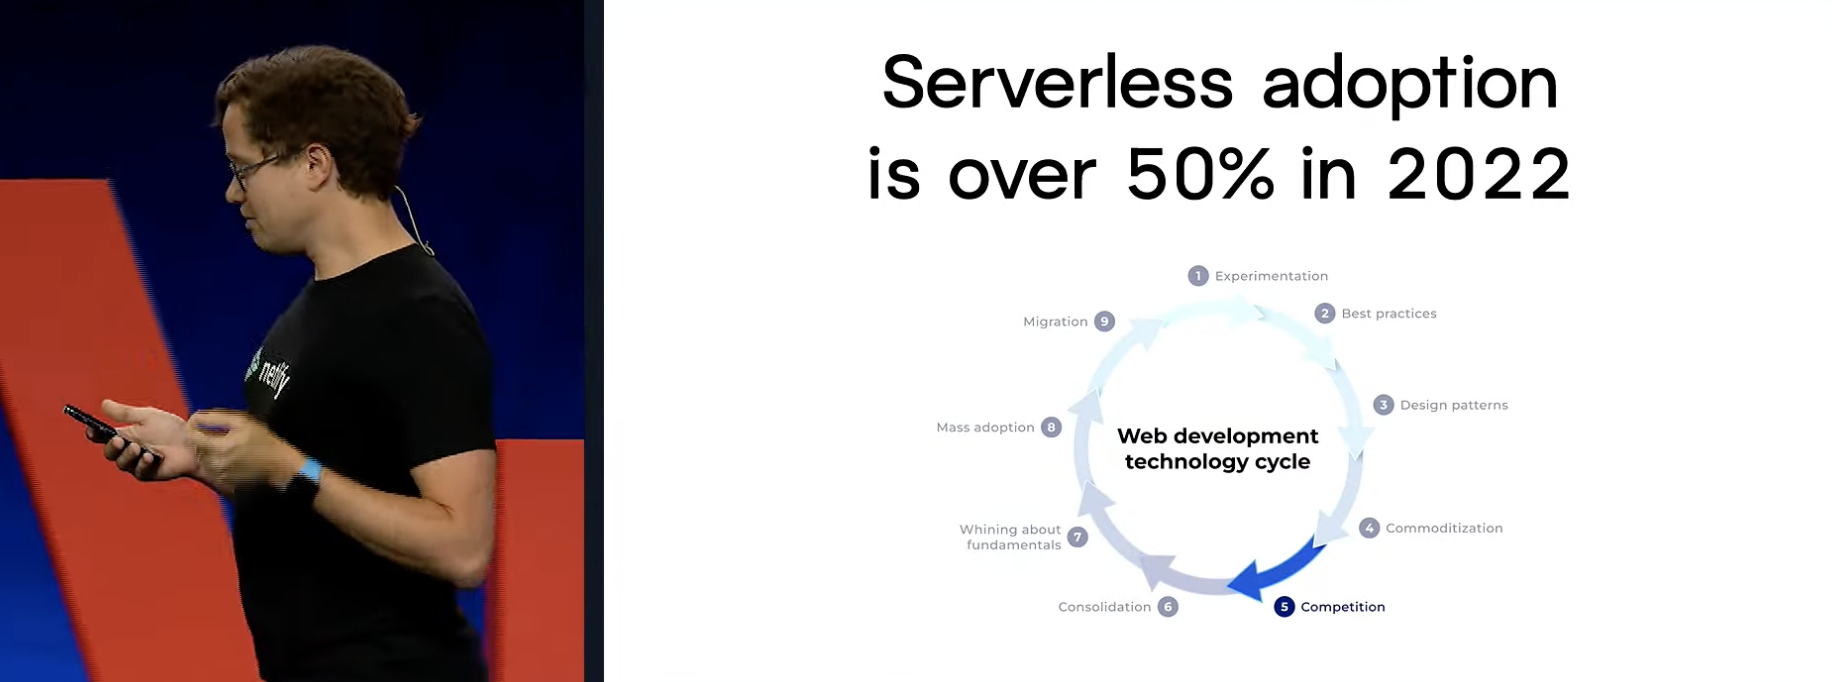 Lauri on stage next to a "Serverless adoption is over 50% in 2022" slide.